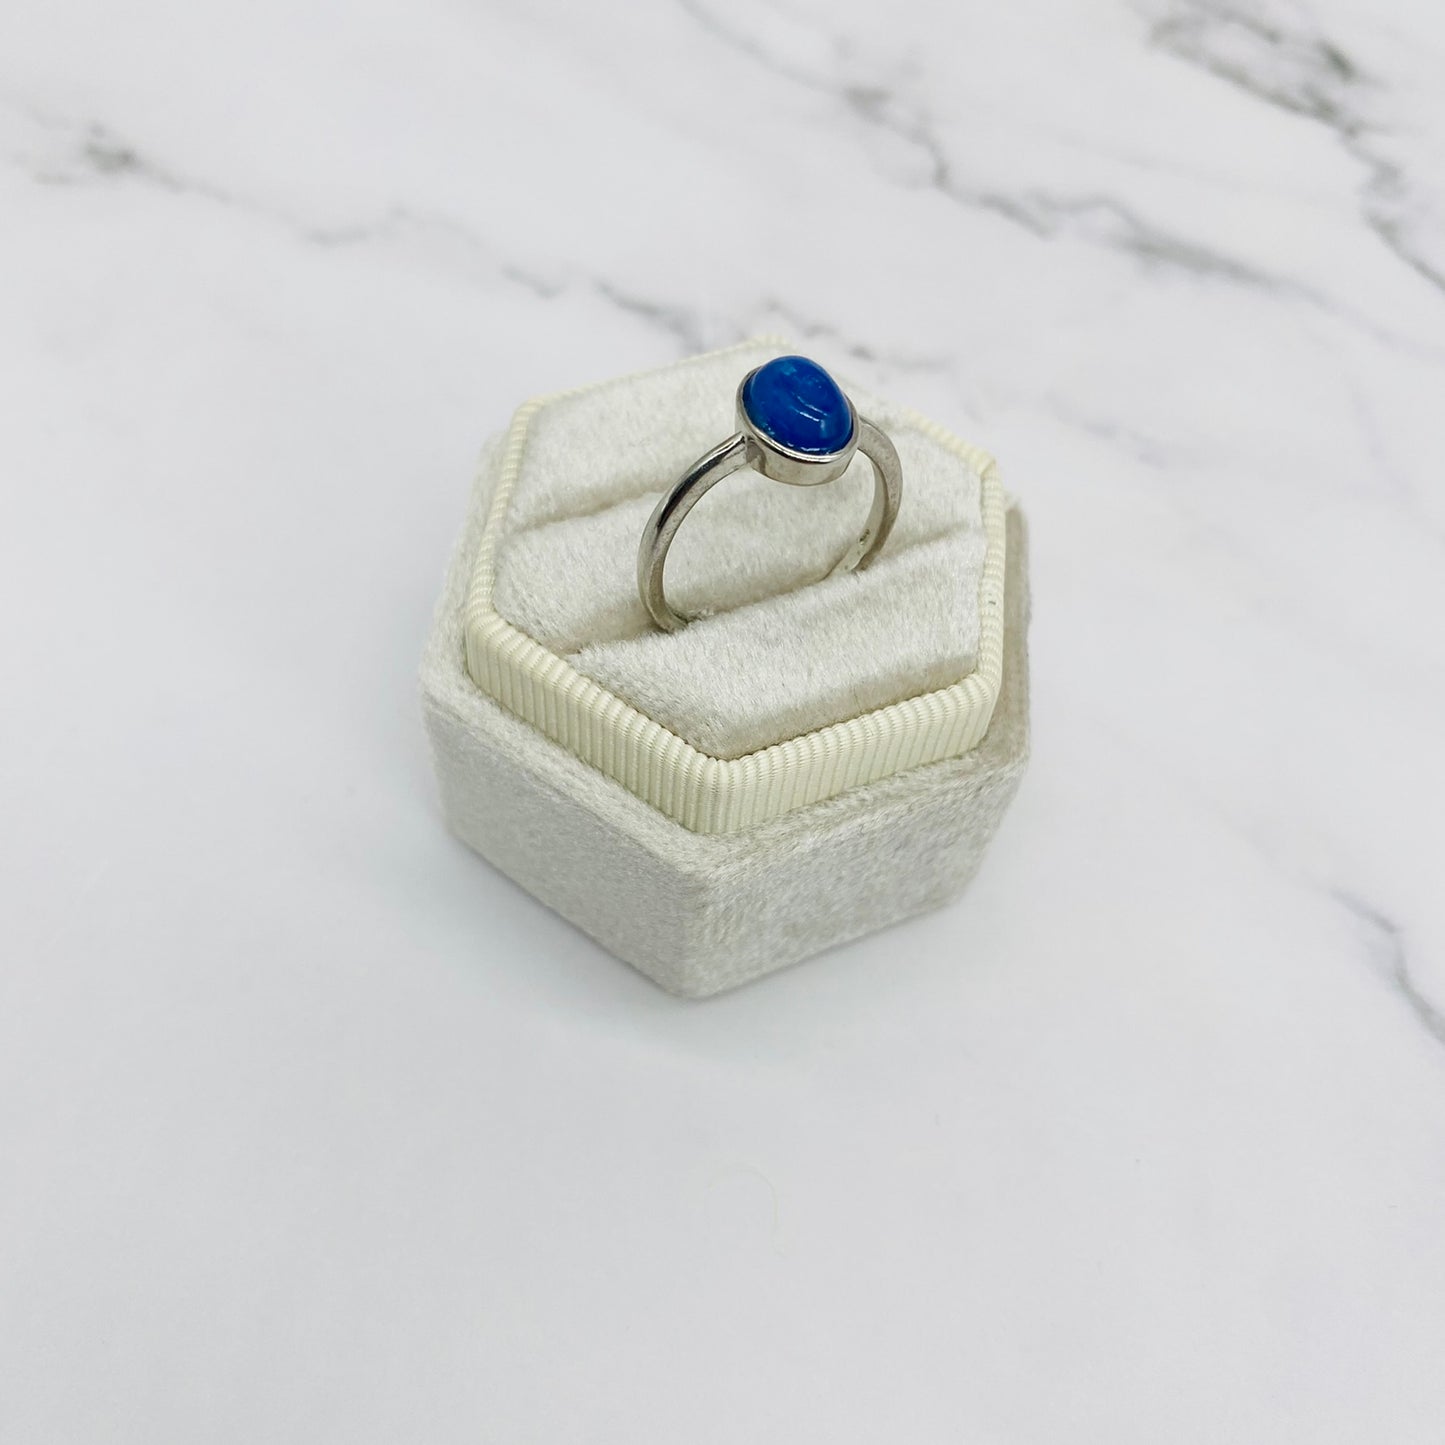 Lapis Lazuli Rings, Handmade Rings, Cute Blue Rings, Adjustable Ring, Stackable Ring, Gift Under 20, Gift For Her, Crystal Ring